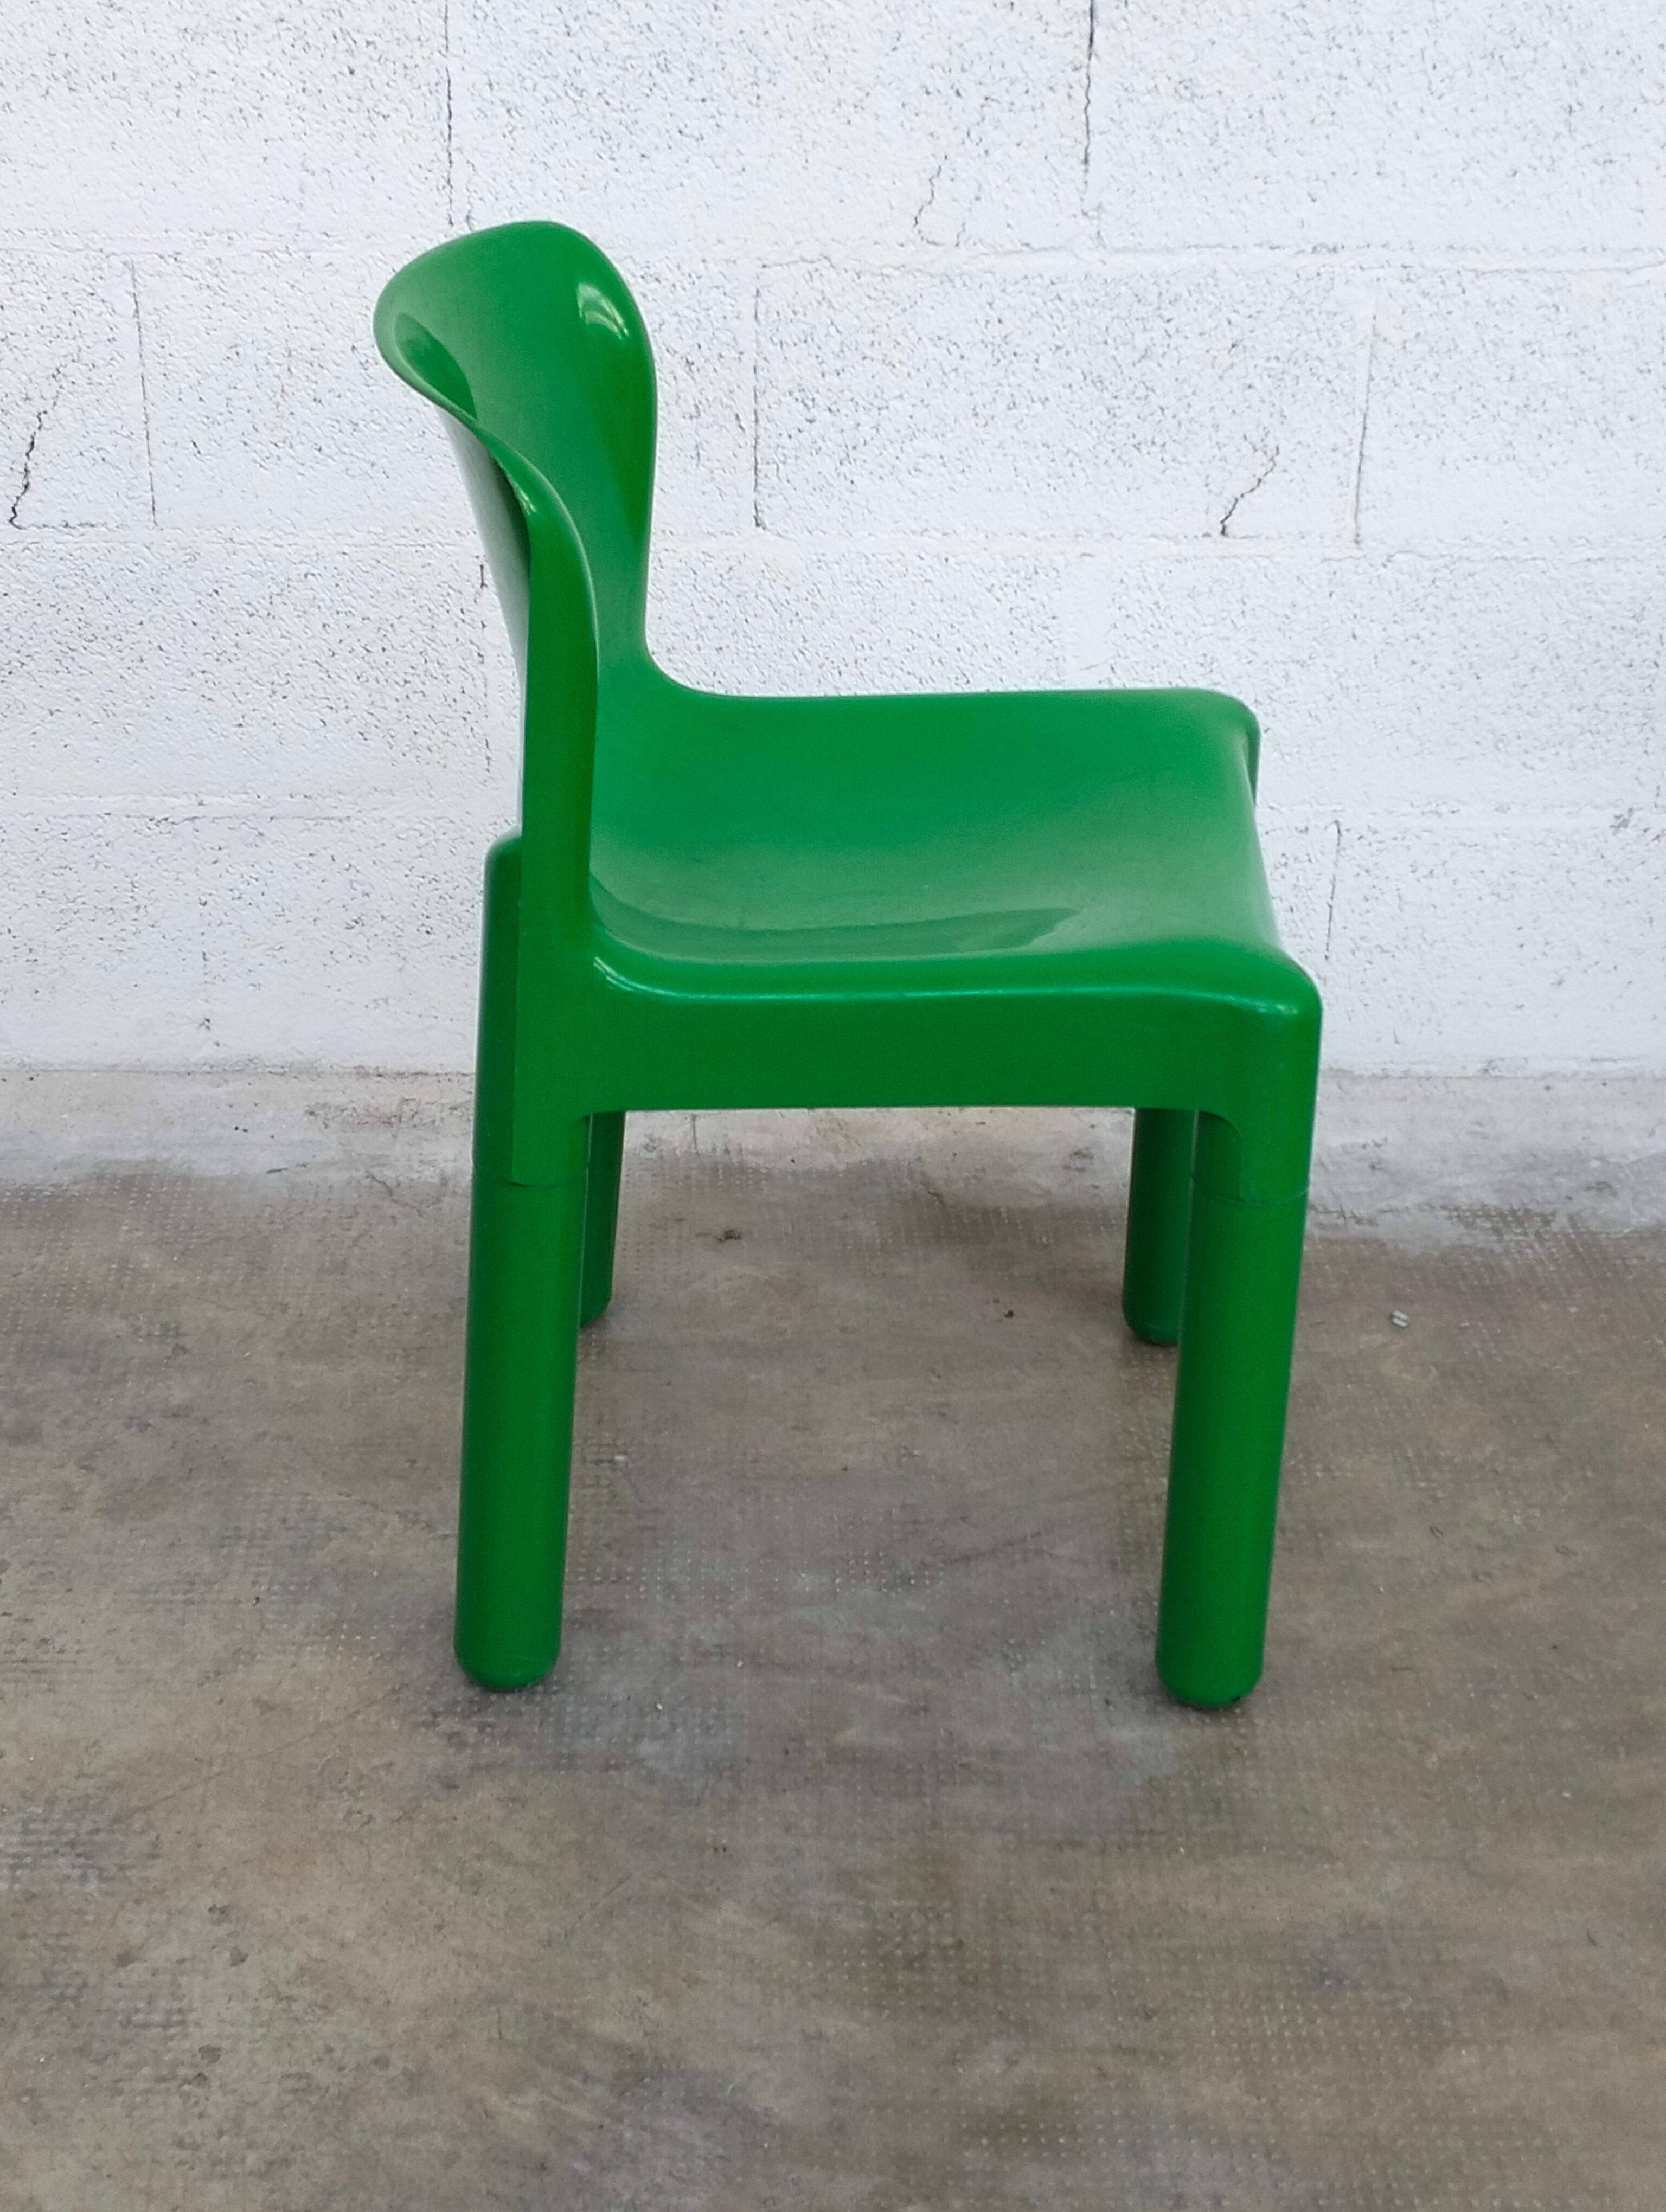 Mid-Century Modern Green Plastic Chairs 4875 by Carlo Bartoli for Kartell 1970s, Set of 4